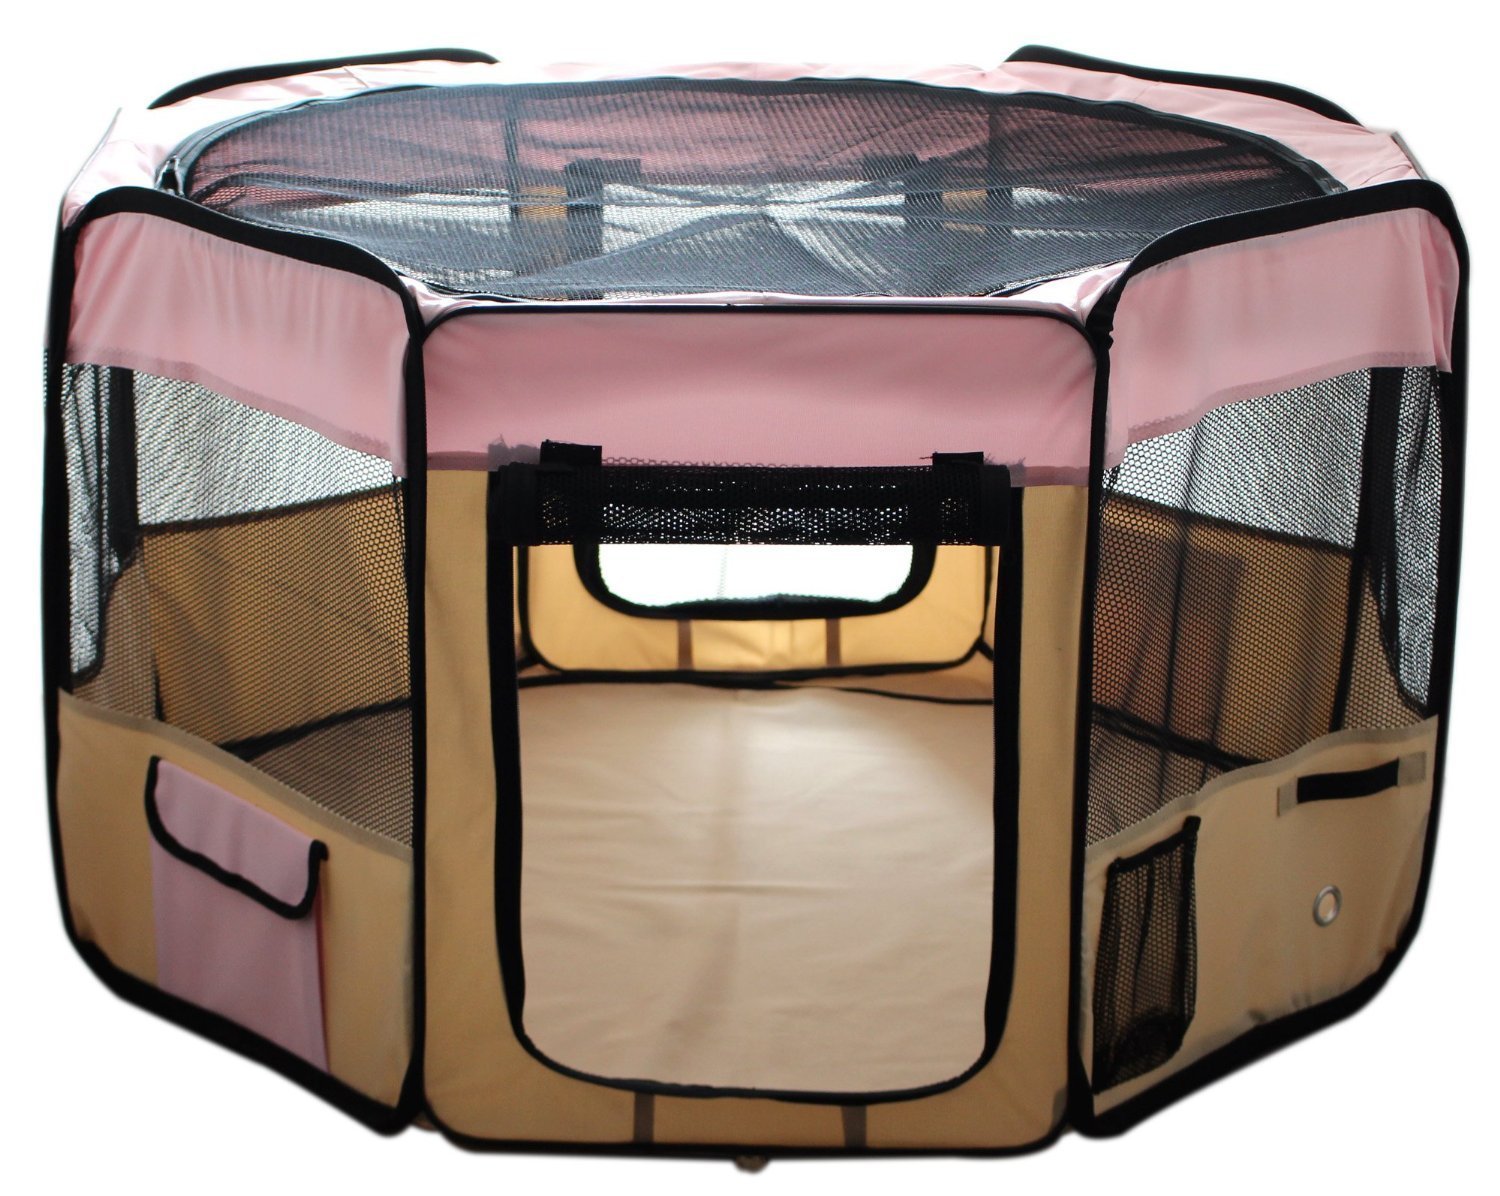 ESK COLLECTION Playpen